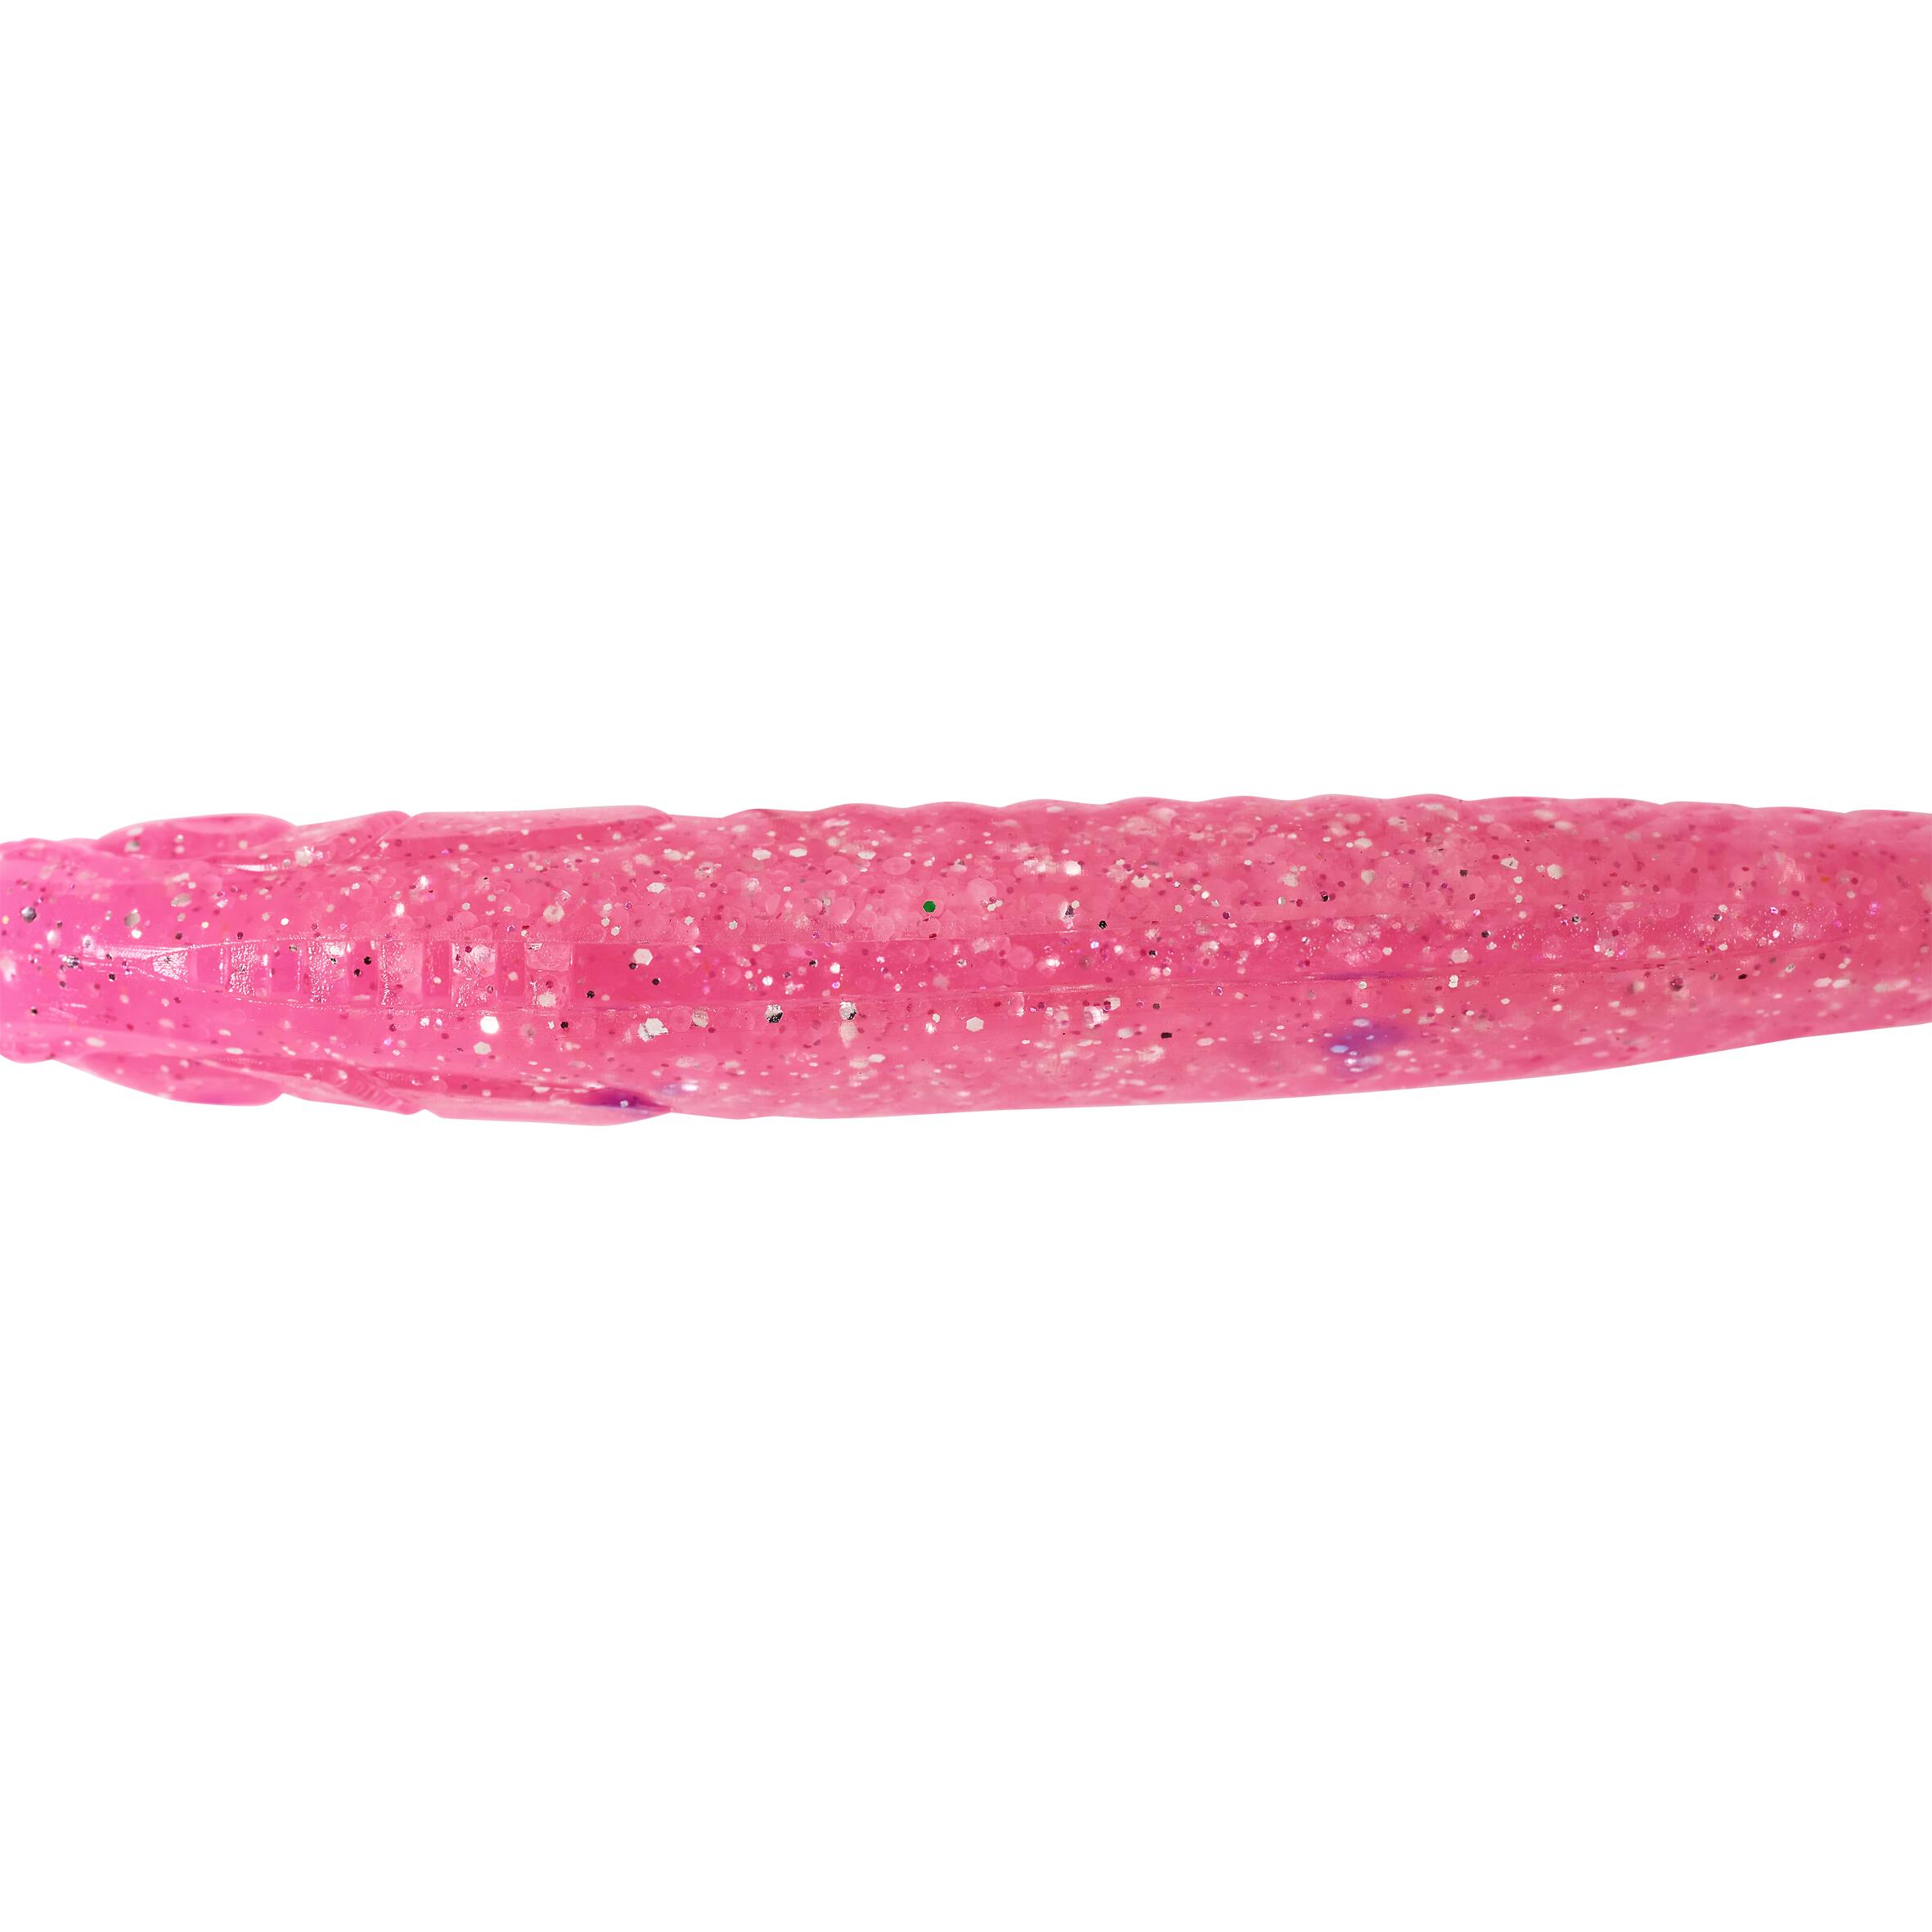 SOFT LURE SHAD WITH ATTRACTANT WXM YUBARI SHD 120 PINK 5/7